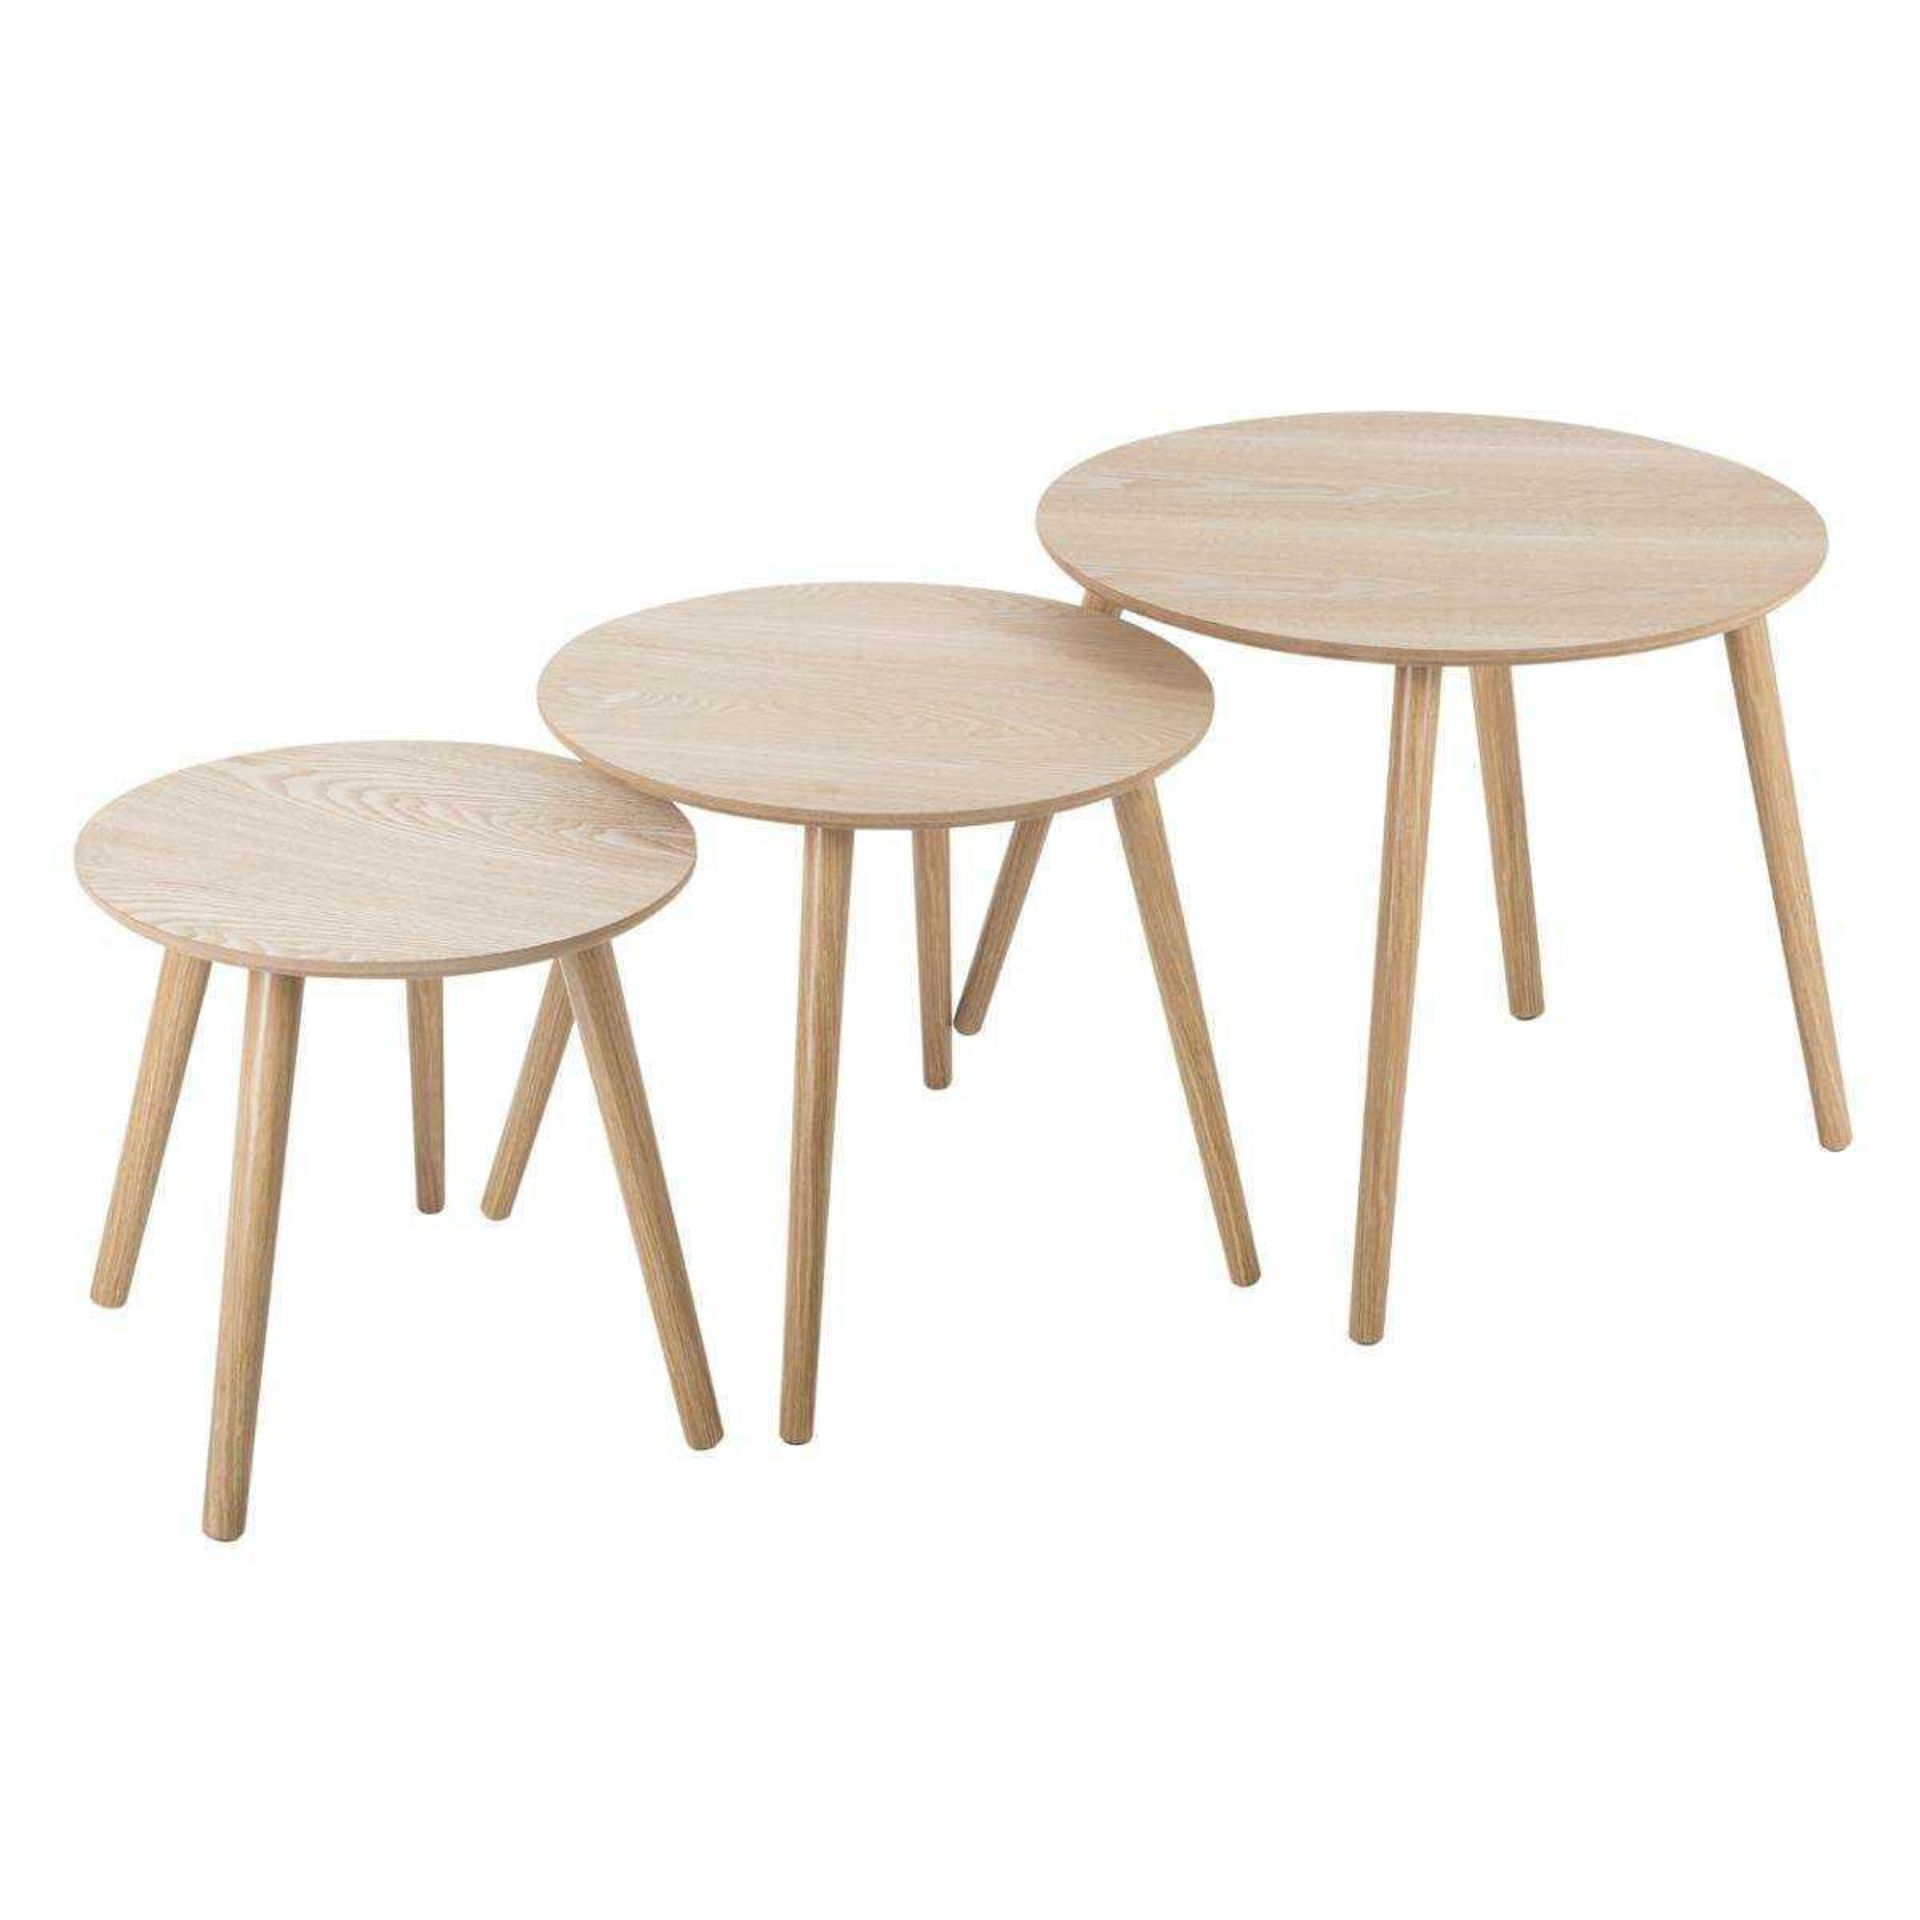 RRP £90 Boxed Norden Home Ingram 3 Piece Nest Of Tables